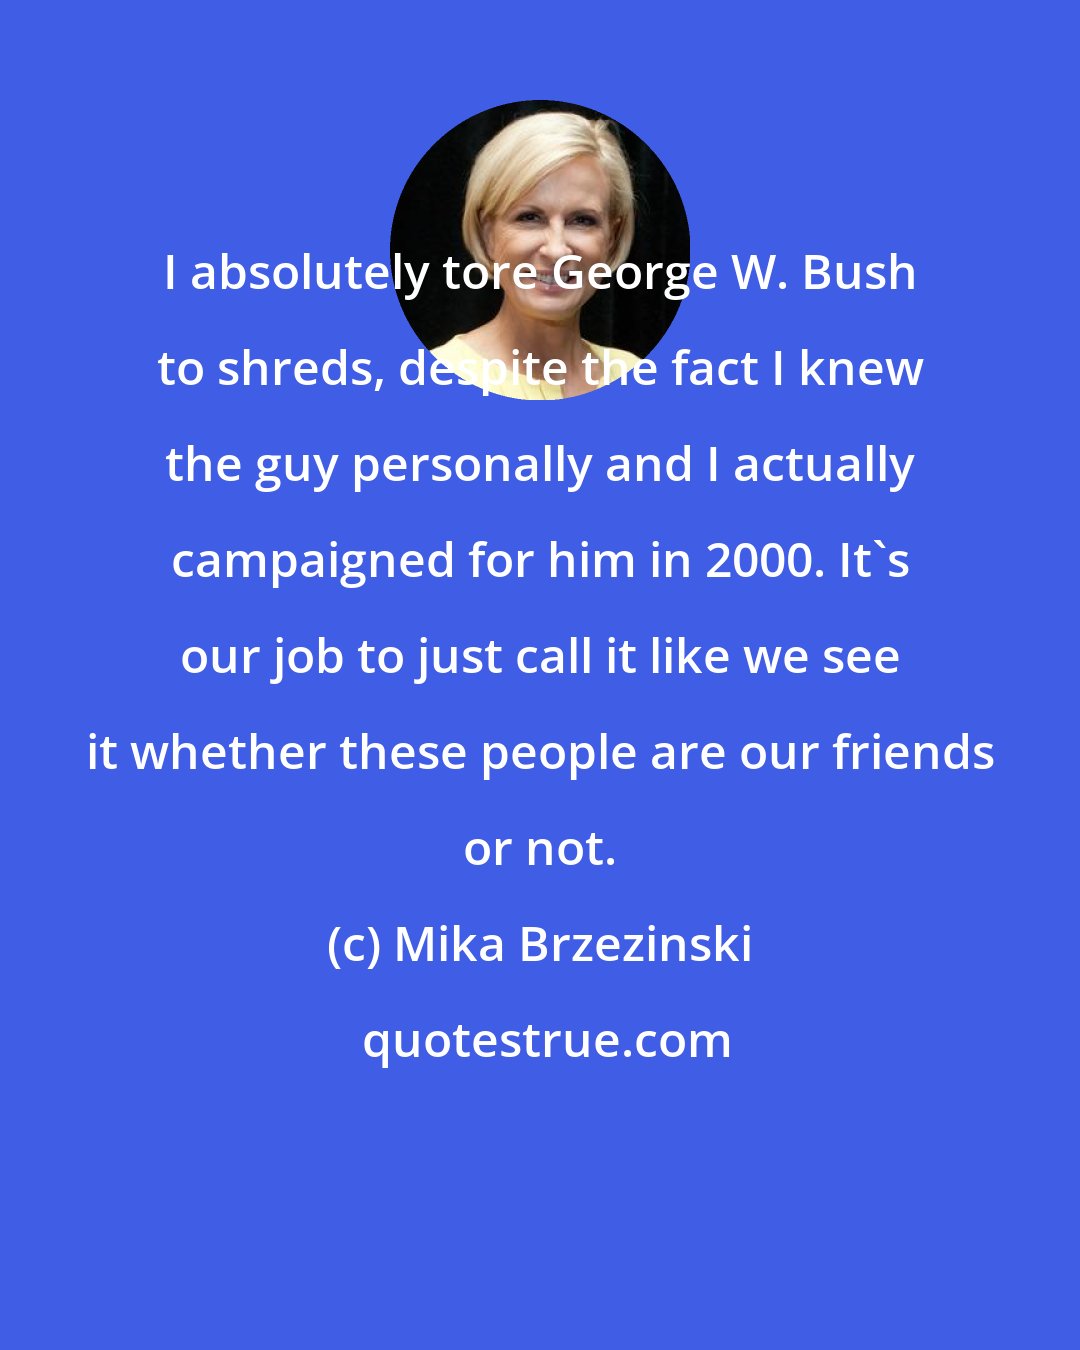 Mika Brzezinski: I absolutely tore George W. Bush to shreds, despite the fact I knew the guy personally and I actually campaigned for him in 2000. It's our job to just call it like we see it whether these people are our friends or not.